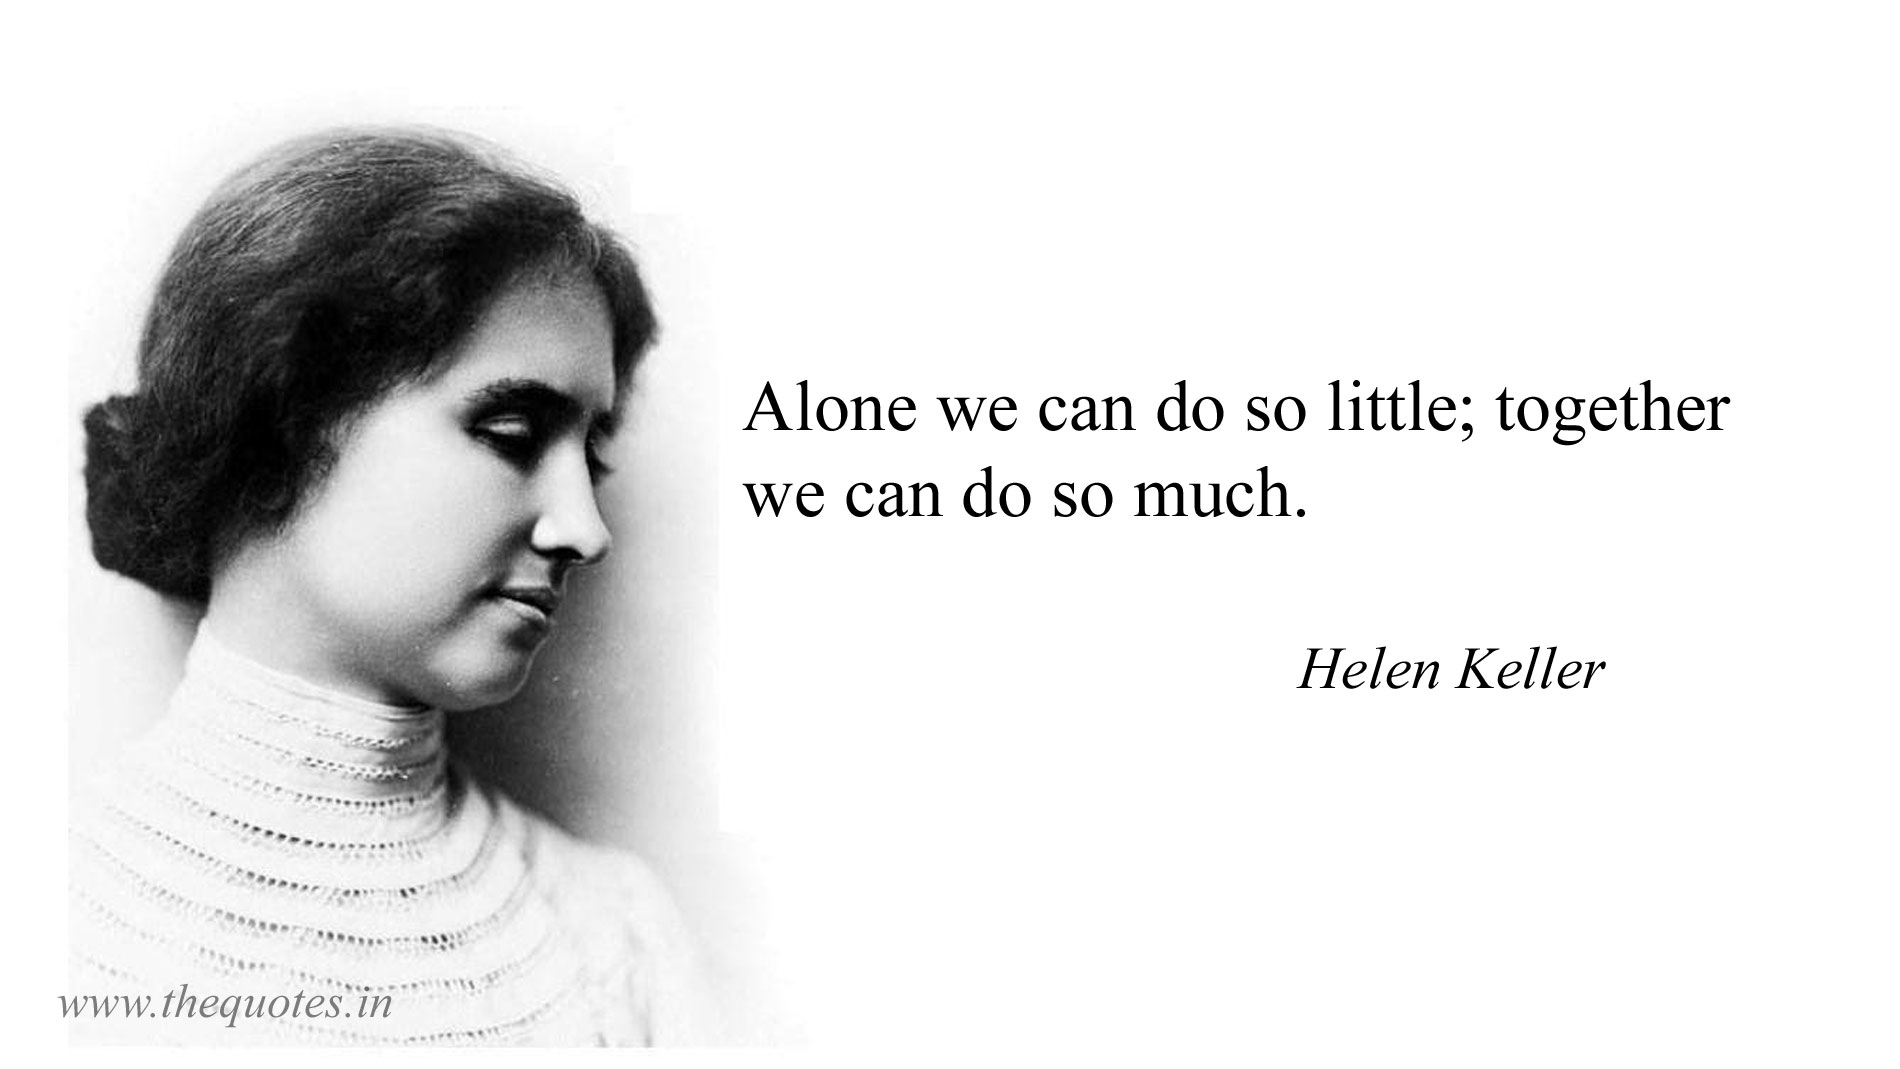 athequotes.in_wp_content_uploads_2016_01_Helen_Keller_Quotes_2.jpg